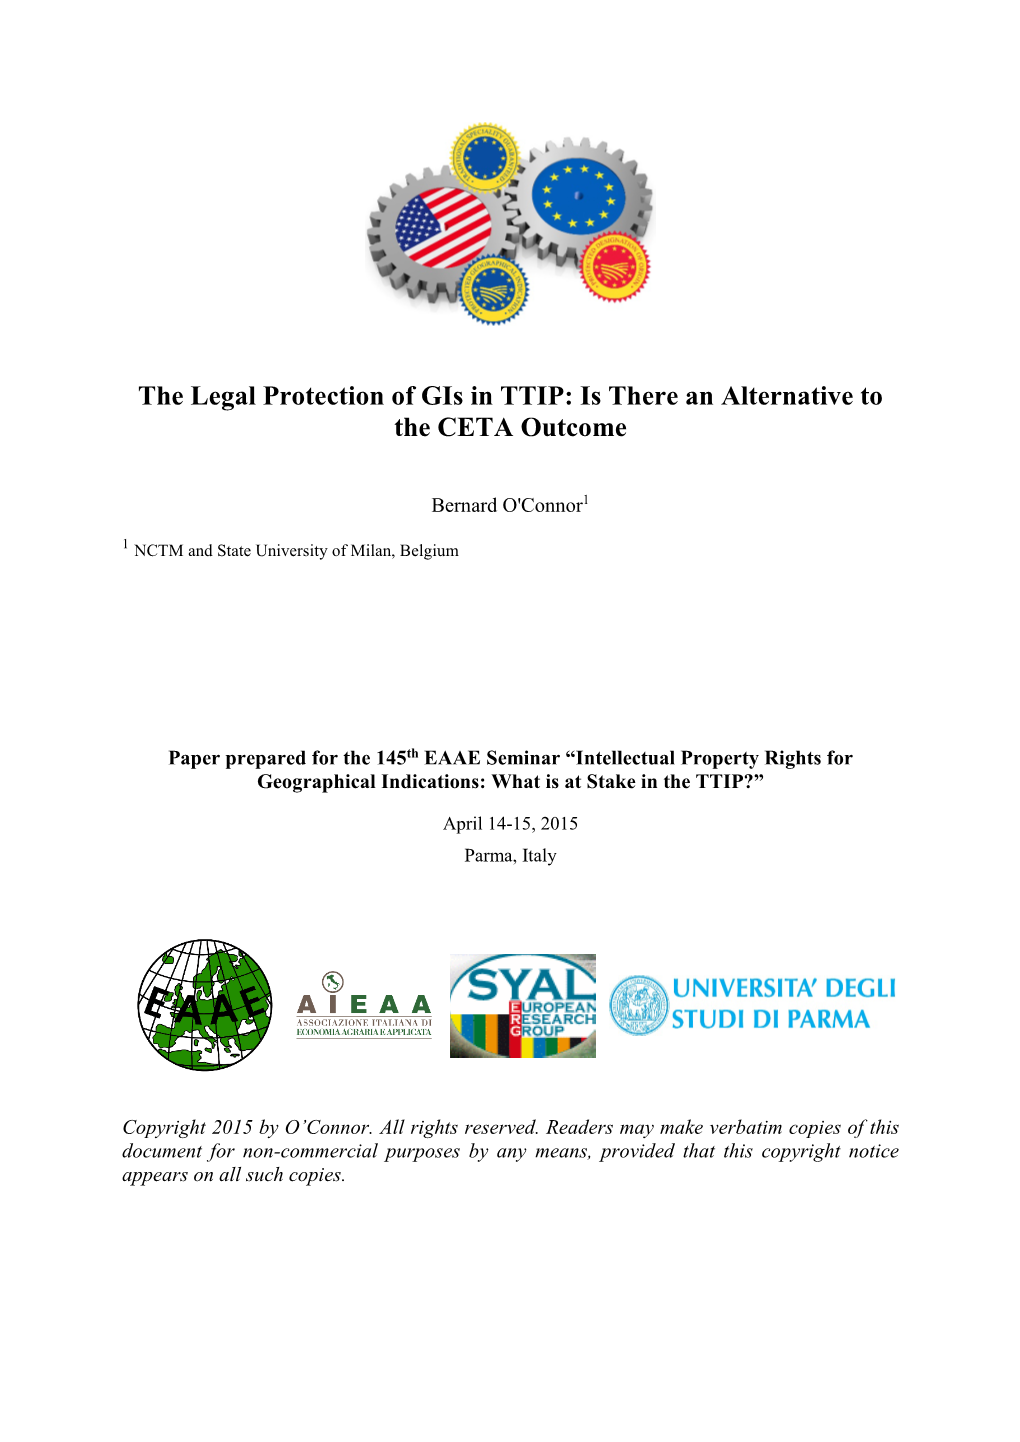 The Legal Protection of Gis in TTIP: Is There an Alternative to the CETA Outcome